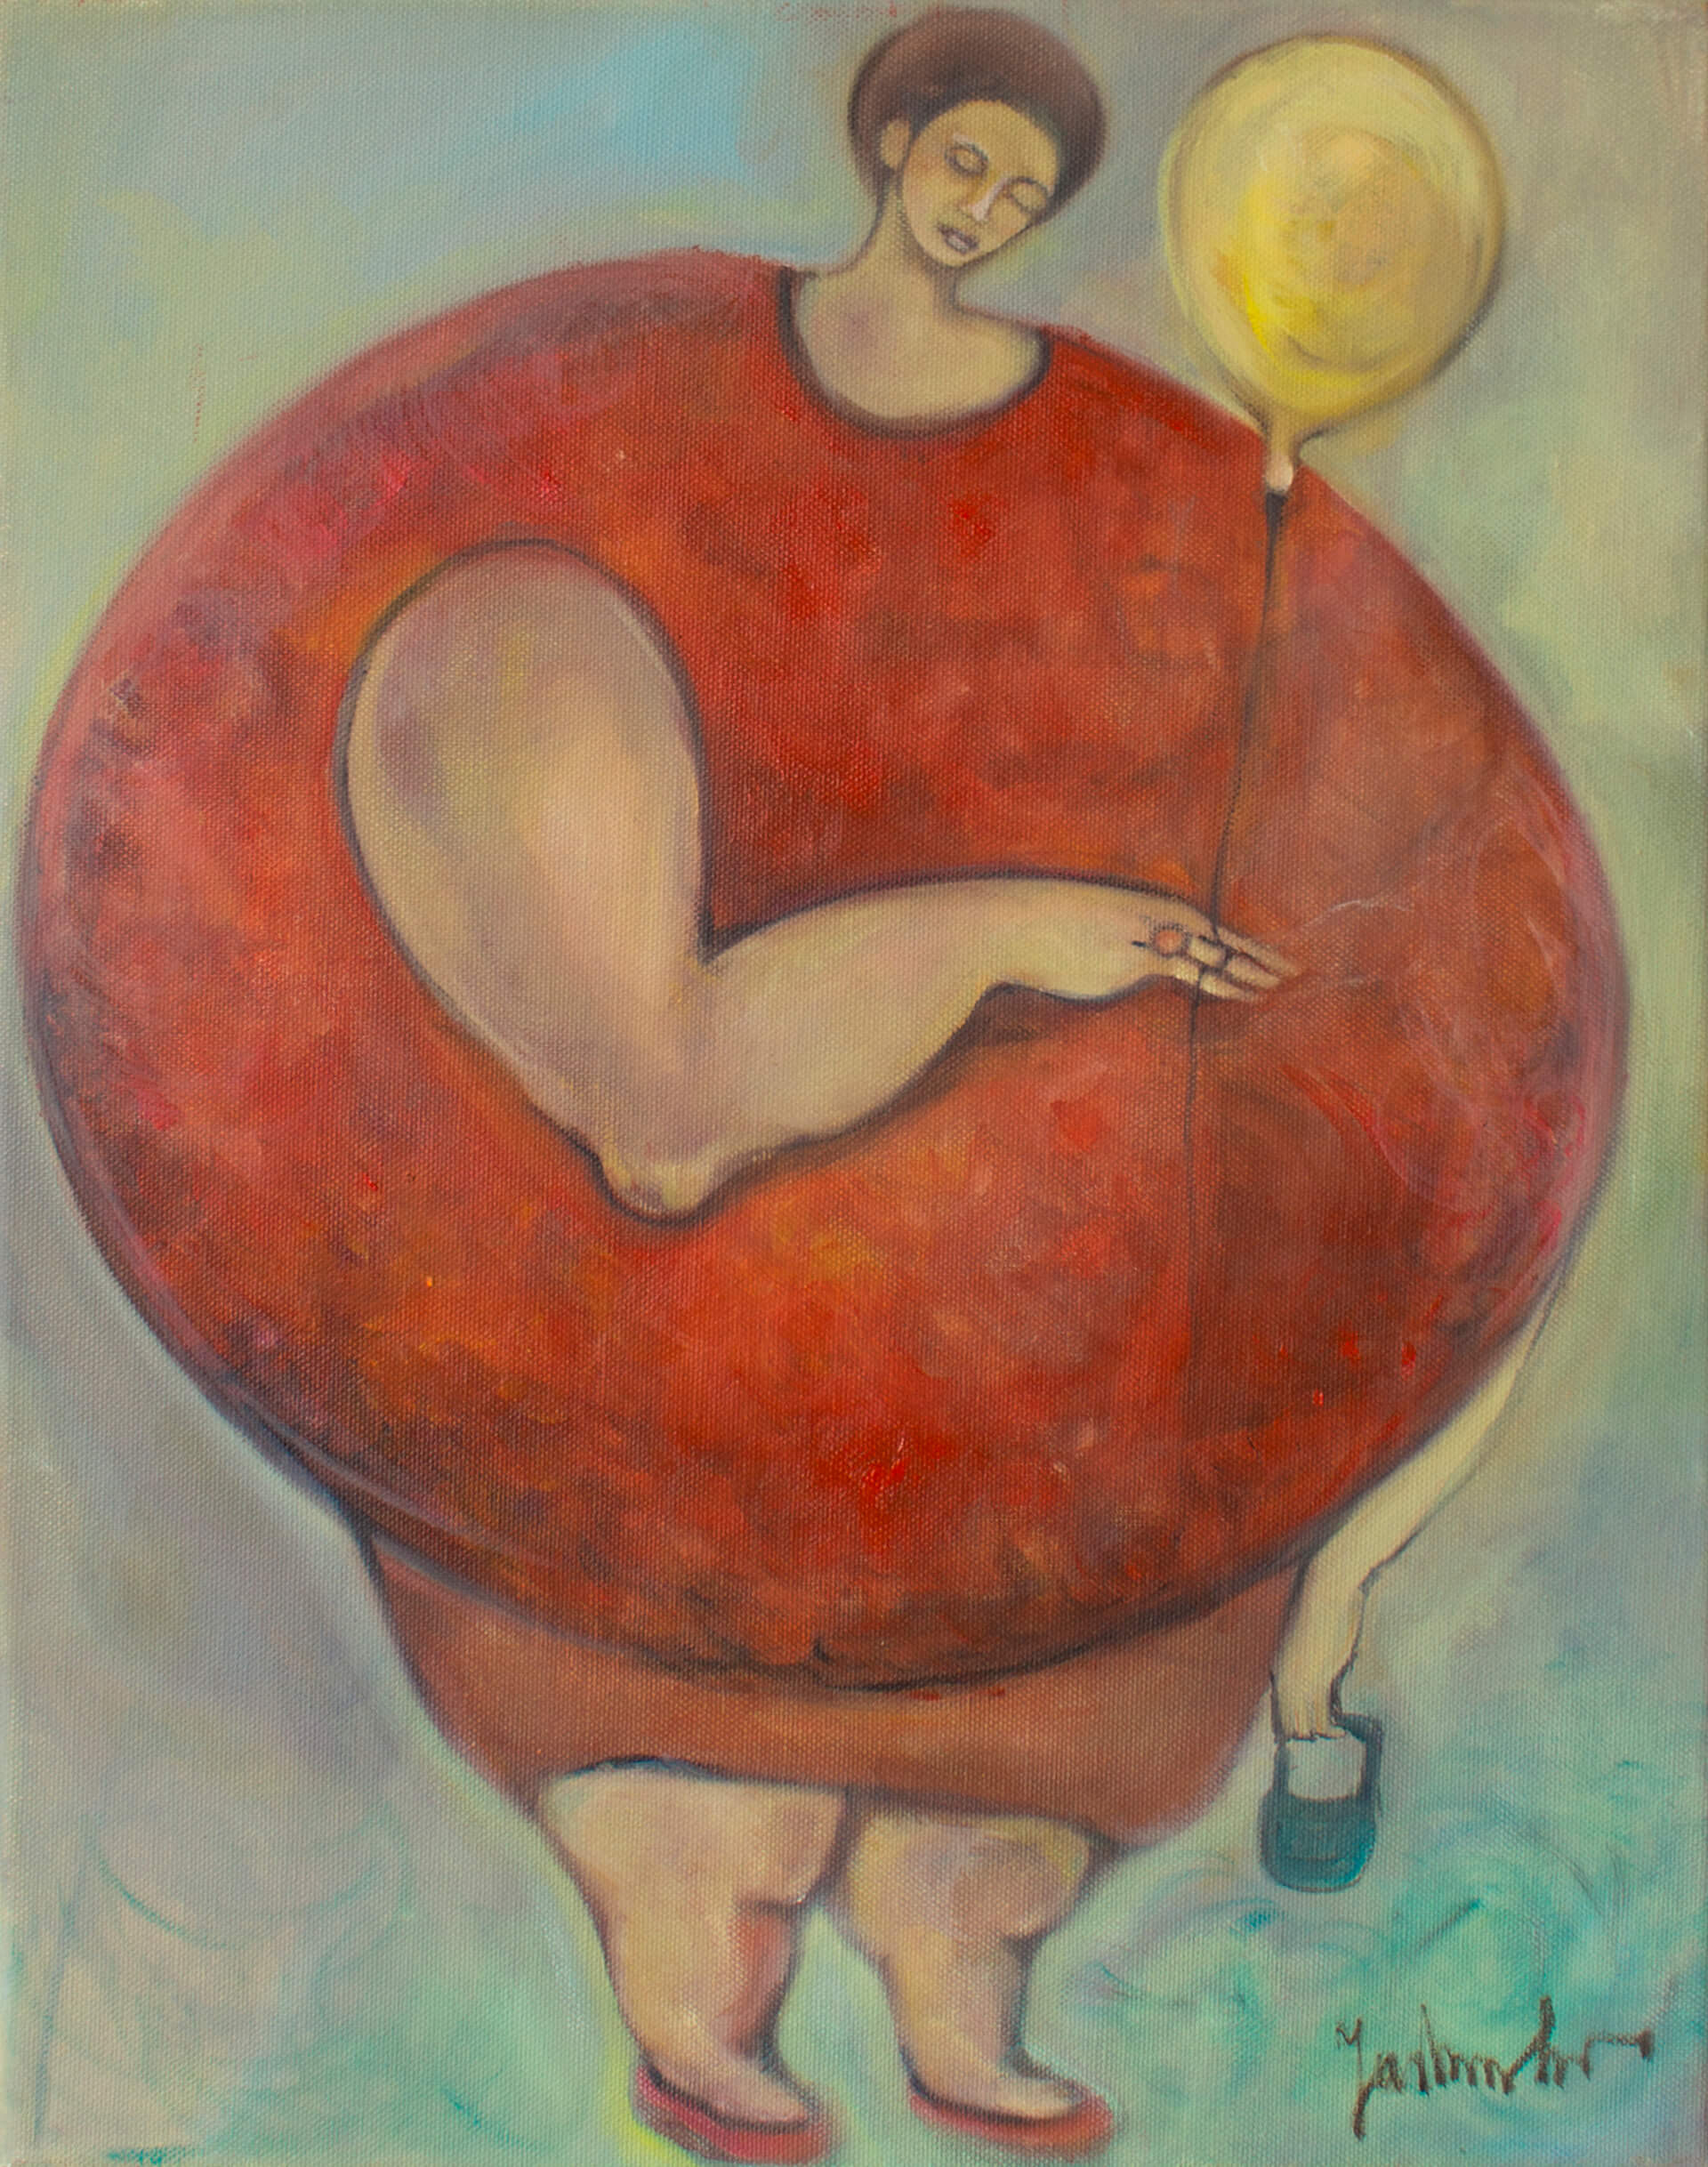 Mrs Apple and balloon. 40x50 cm. Oil on canvas. 